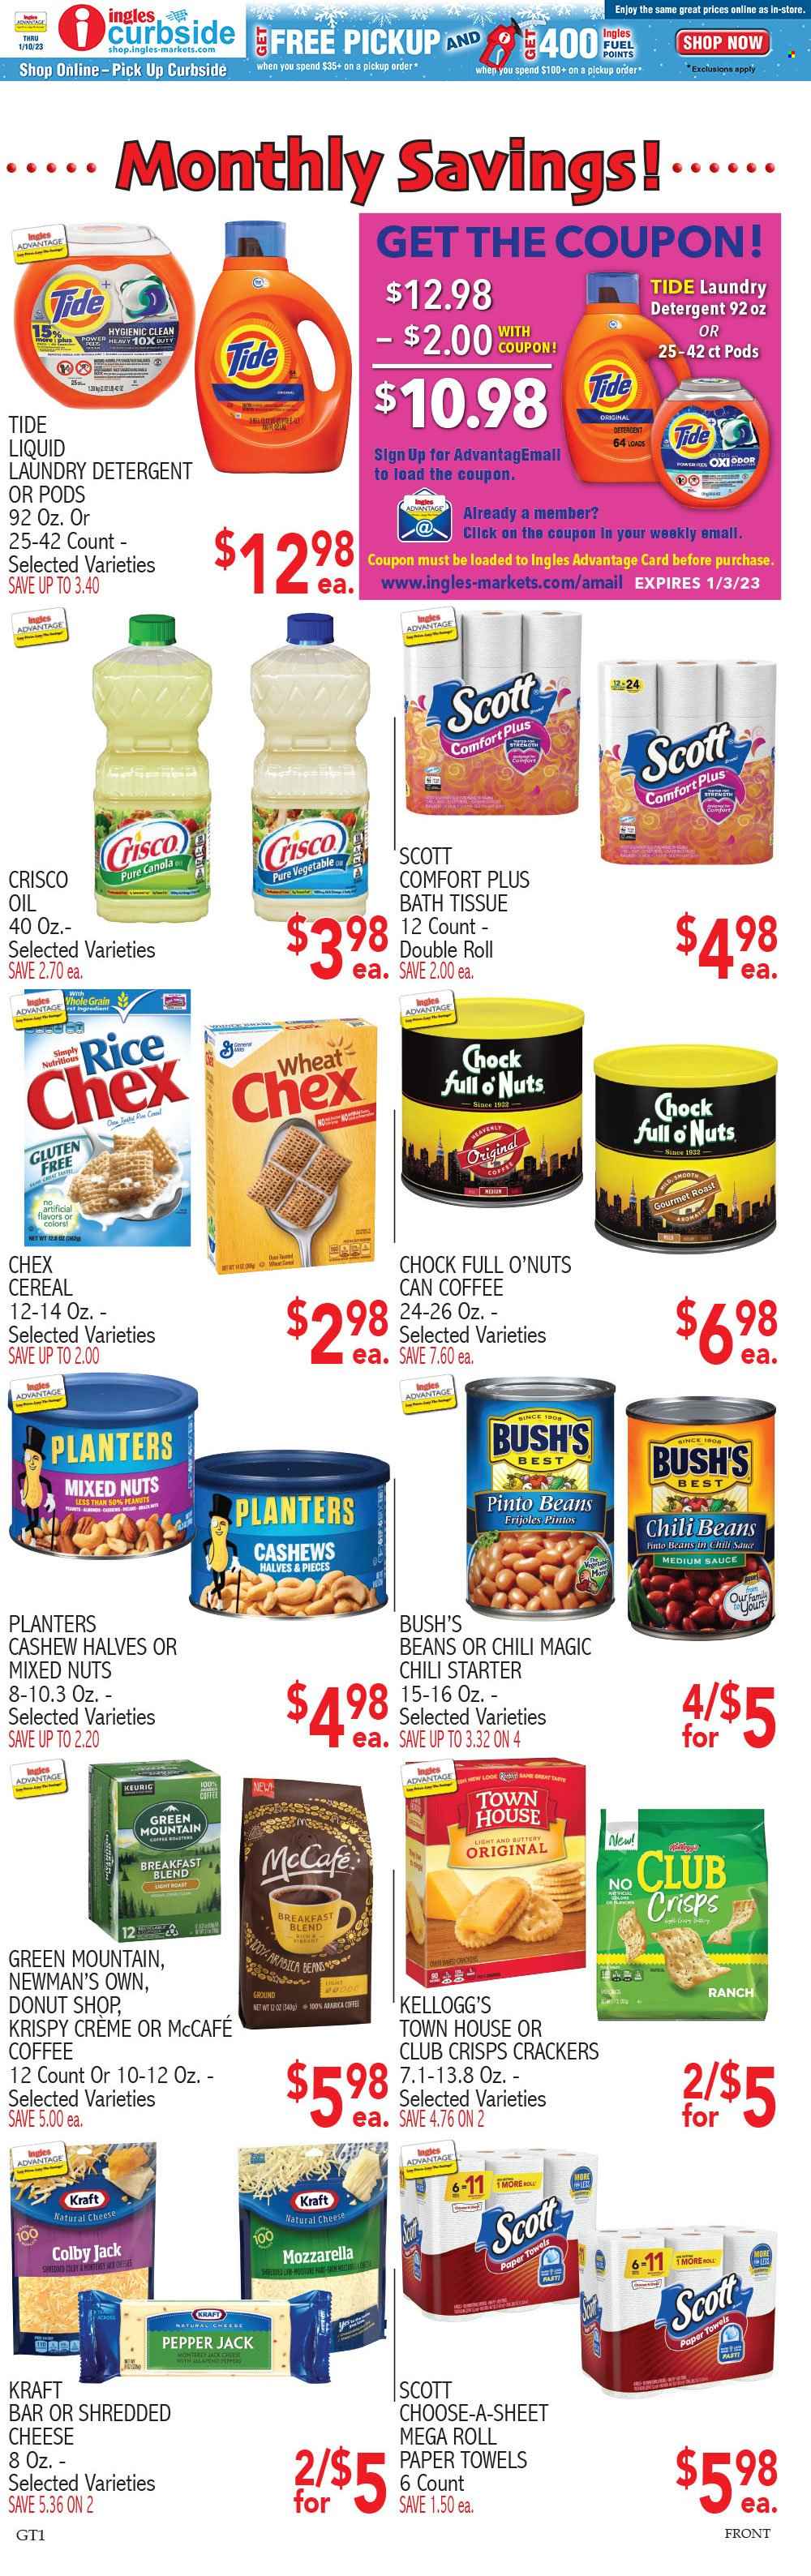 thumbnail - Ingles Flyer - 11/30/2022 - 12/06/2022 - Sales products - peppers, sauce, Kraft®, Colby cheese, Monterey Jack cheese, mozzarella, shredded cheese, Pepper Jack cheese, crackers, Kellogg's, Crisco, pinto beans, chili beans, cereals, rice, chilli sauce, oil, cashews, peanuts, mixed nuts, Planters, coffee, McCafe, Keurig, breakfast blend, Green Mountain, bath tissue, Scott, kitchen towels, paper towels, detergent, Tide, laundry detergent, battery. Page 8.